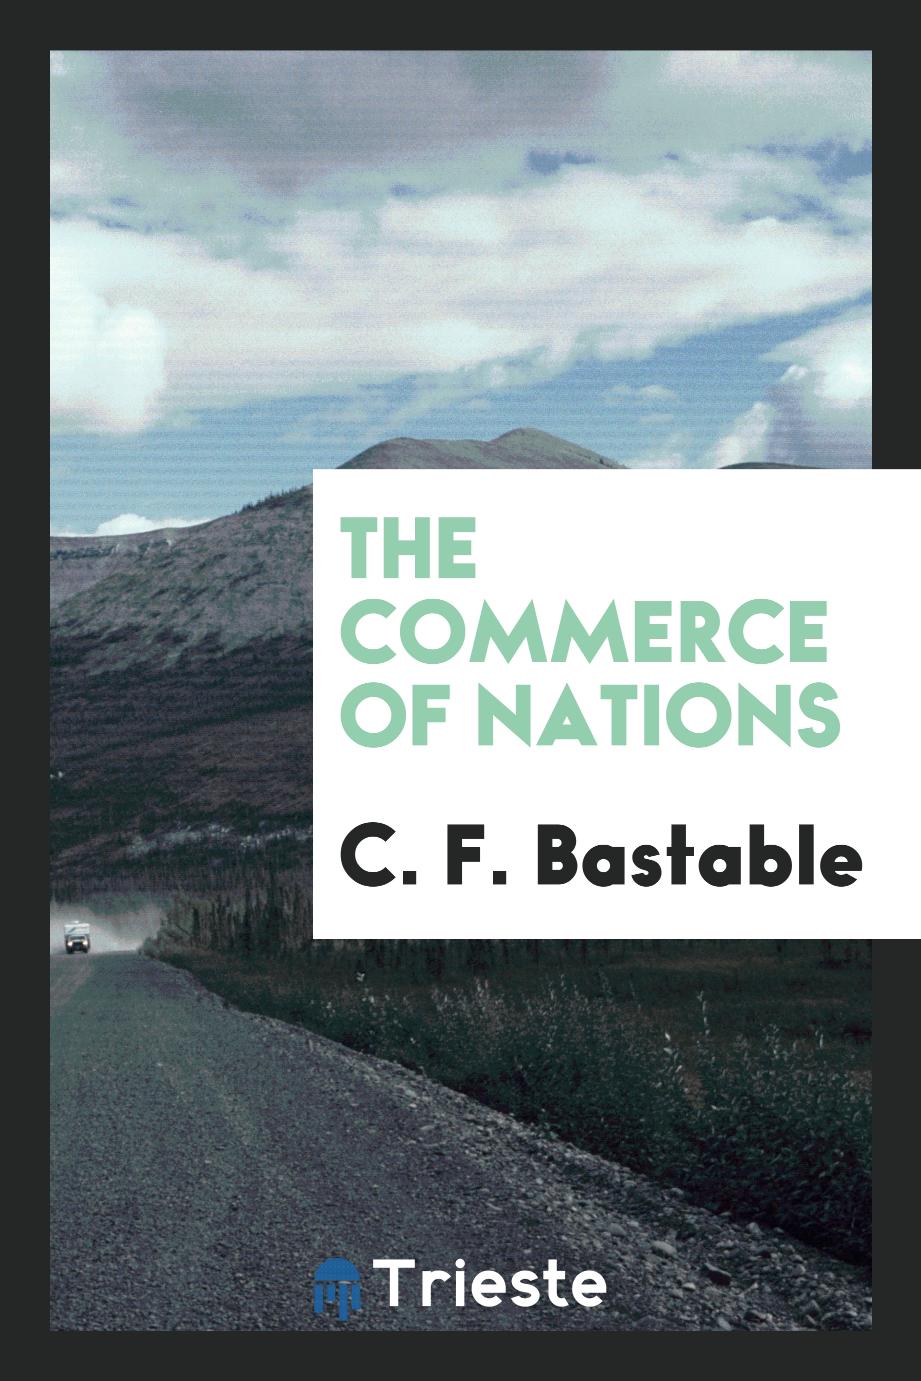 The commerce of nations